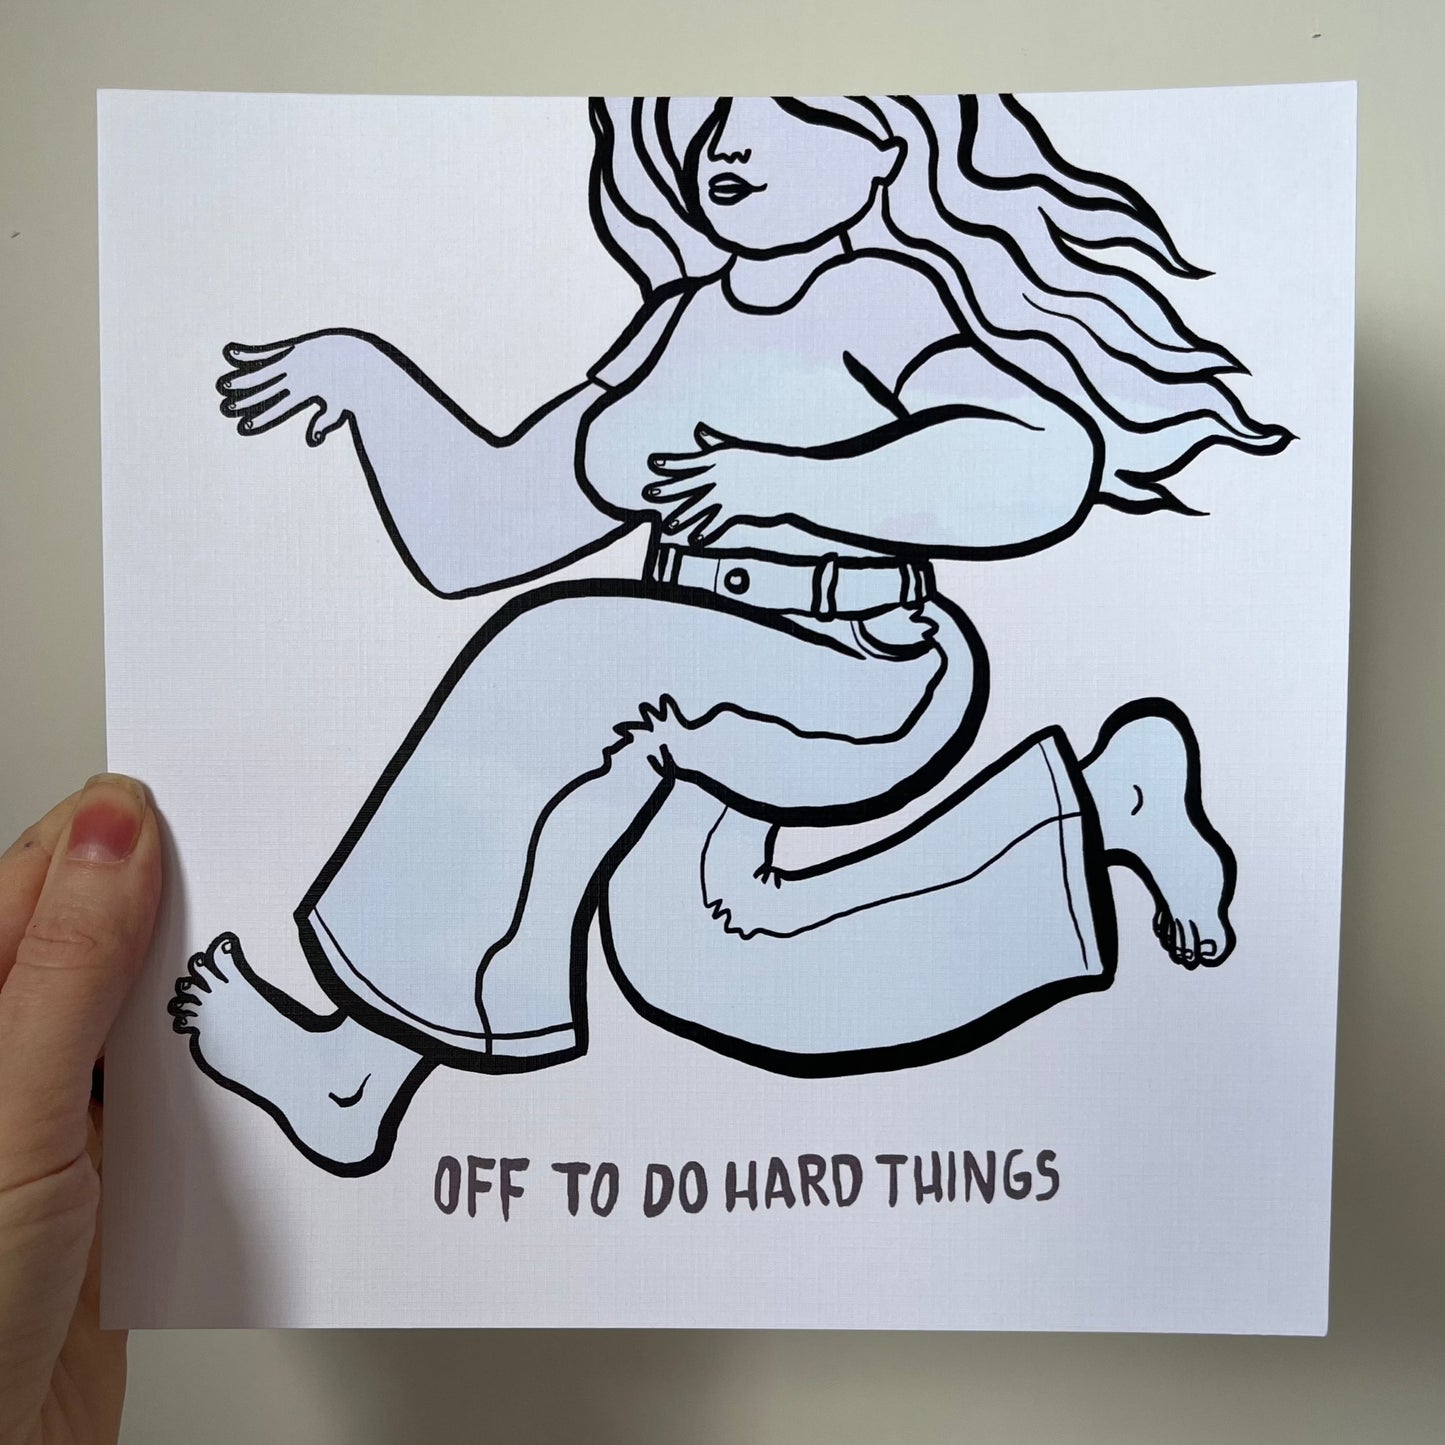 Off to Do Hard Things 8x8" Print